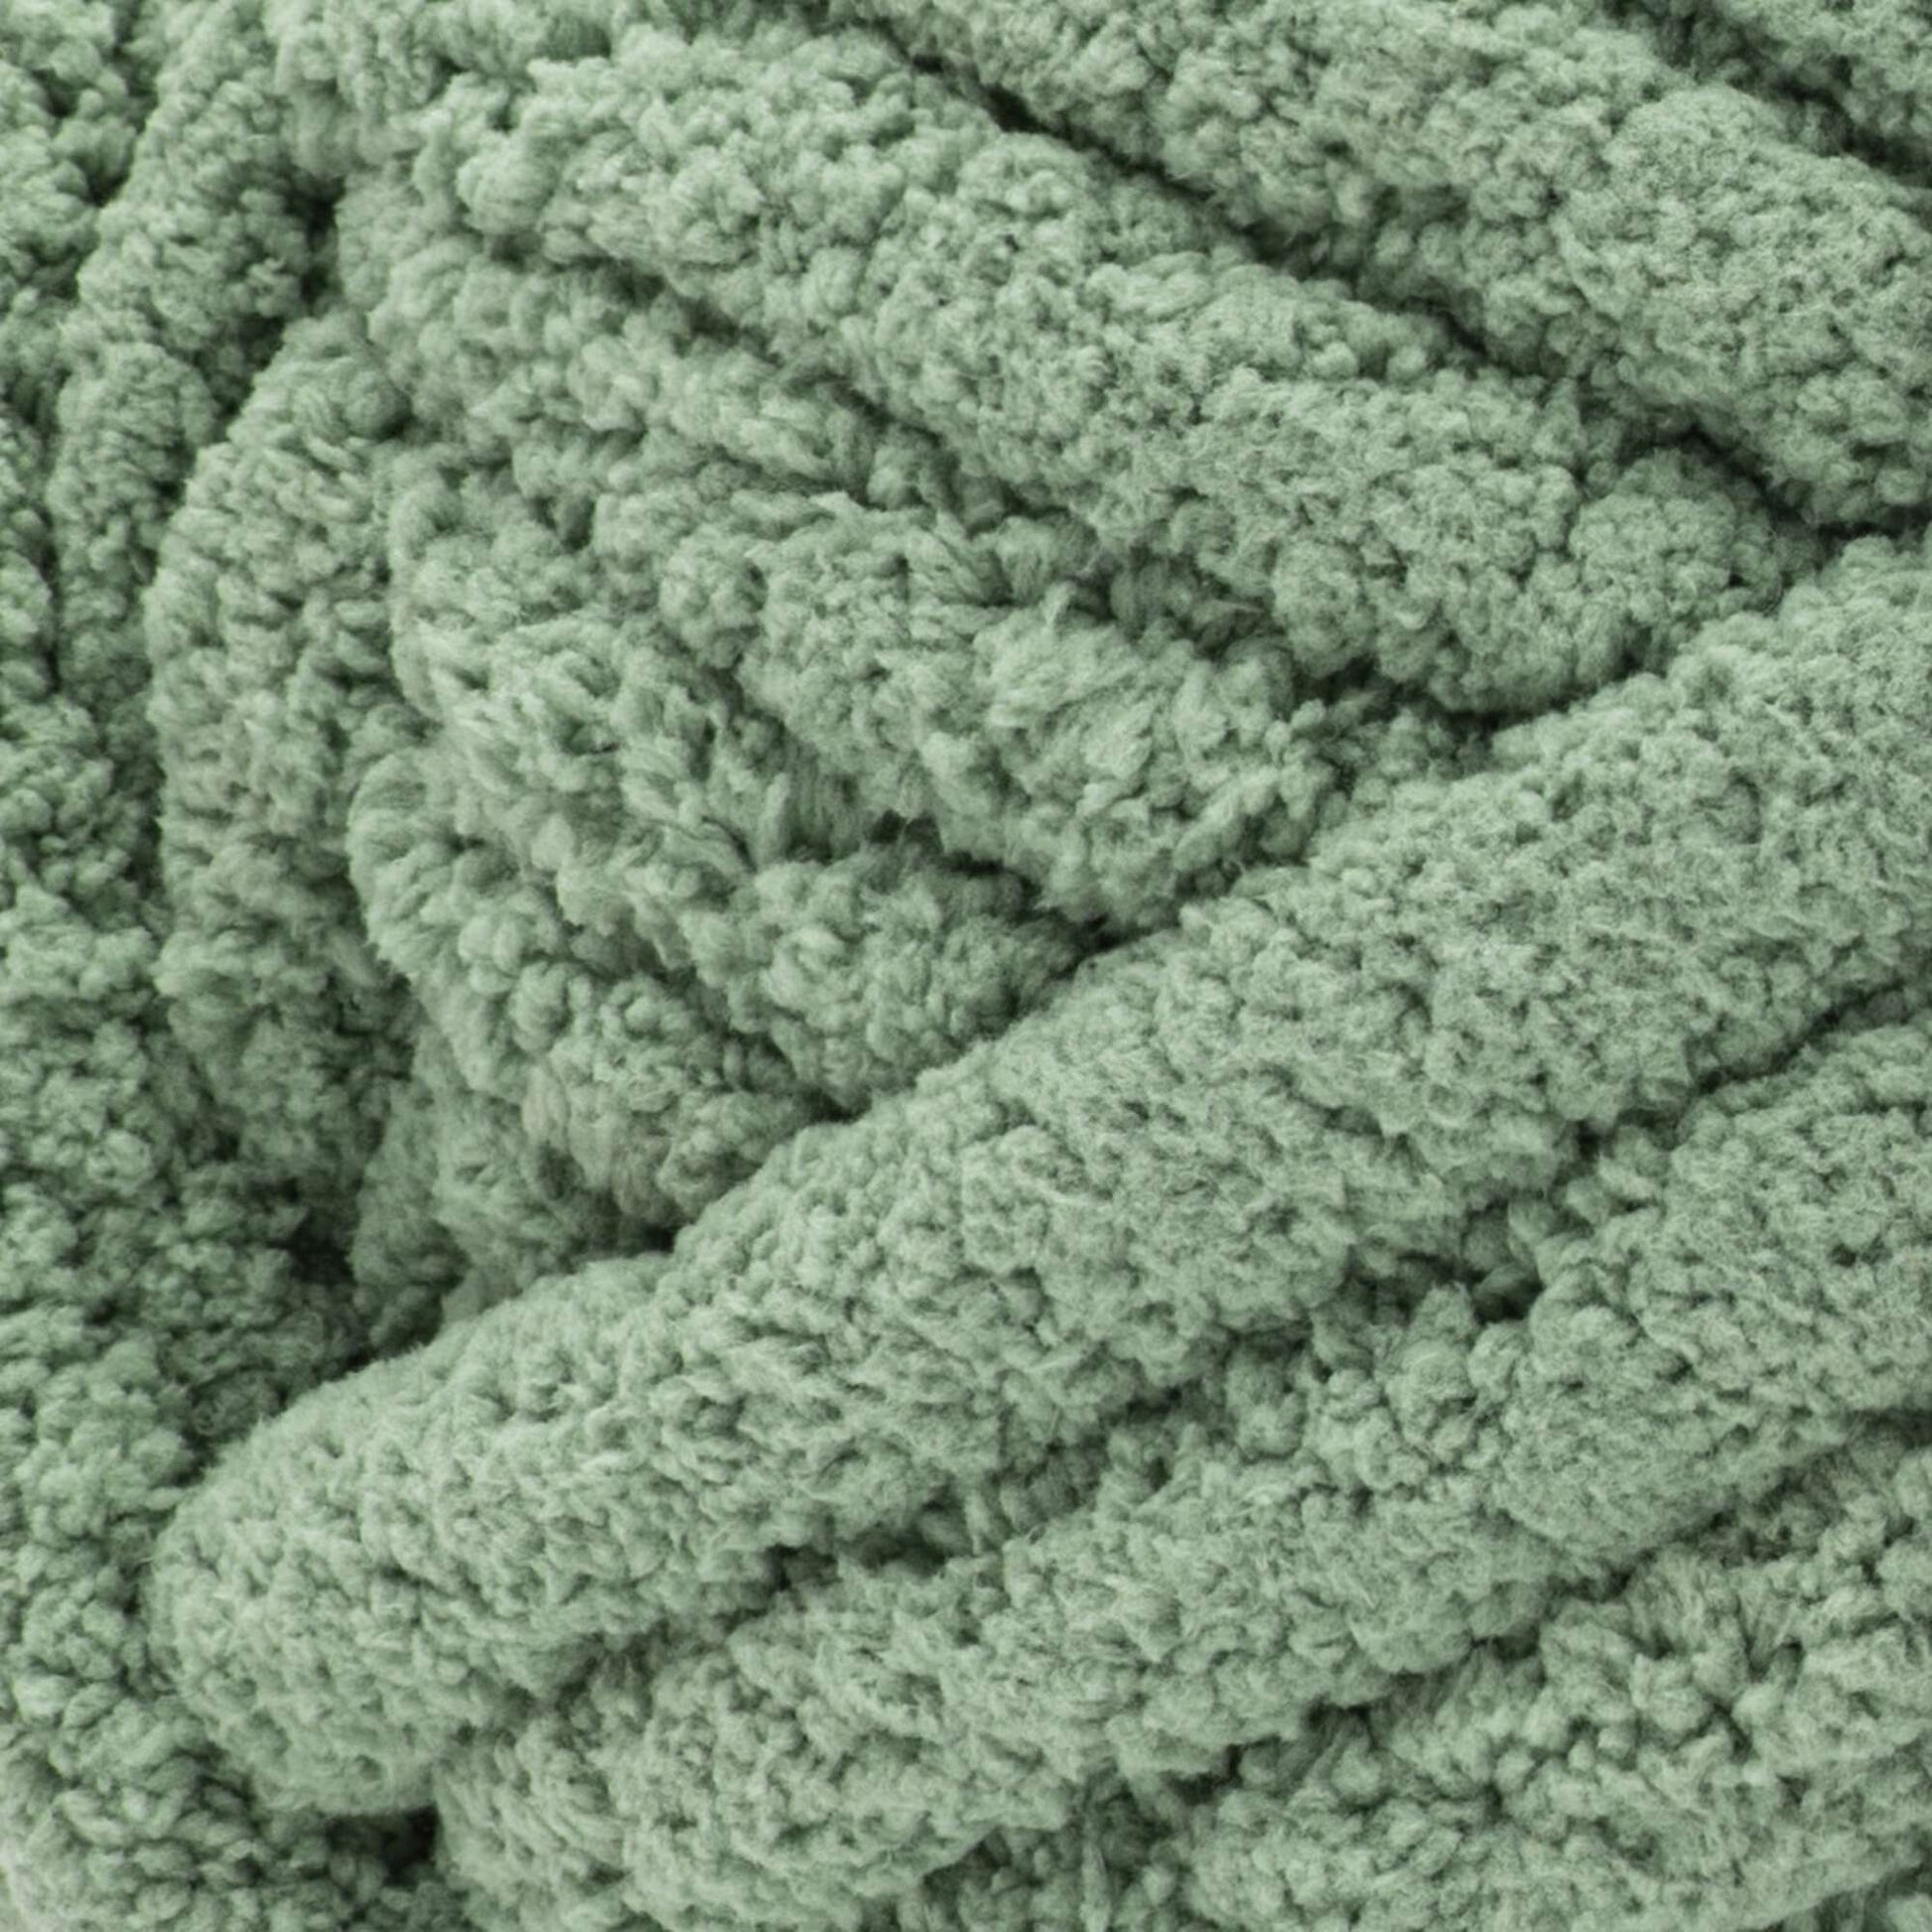 Bernat Blanket Extra Thick Yarn (600g/21.2oz) - Discontinued Shades Green Frost